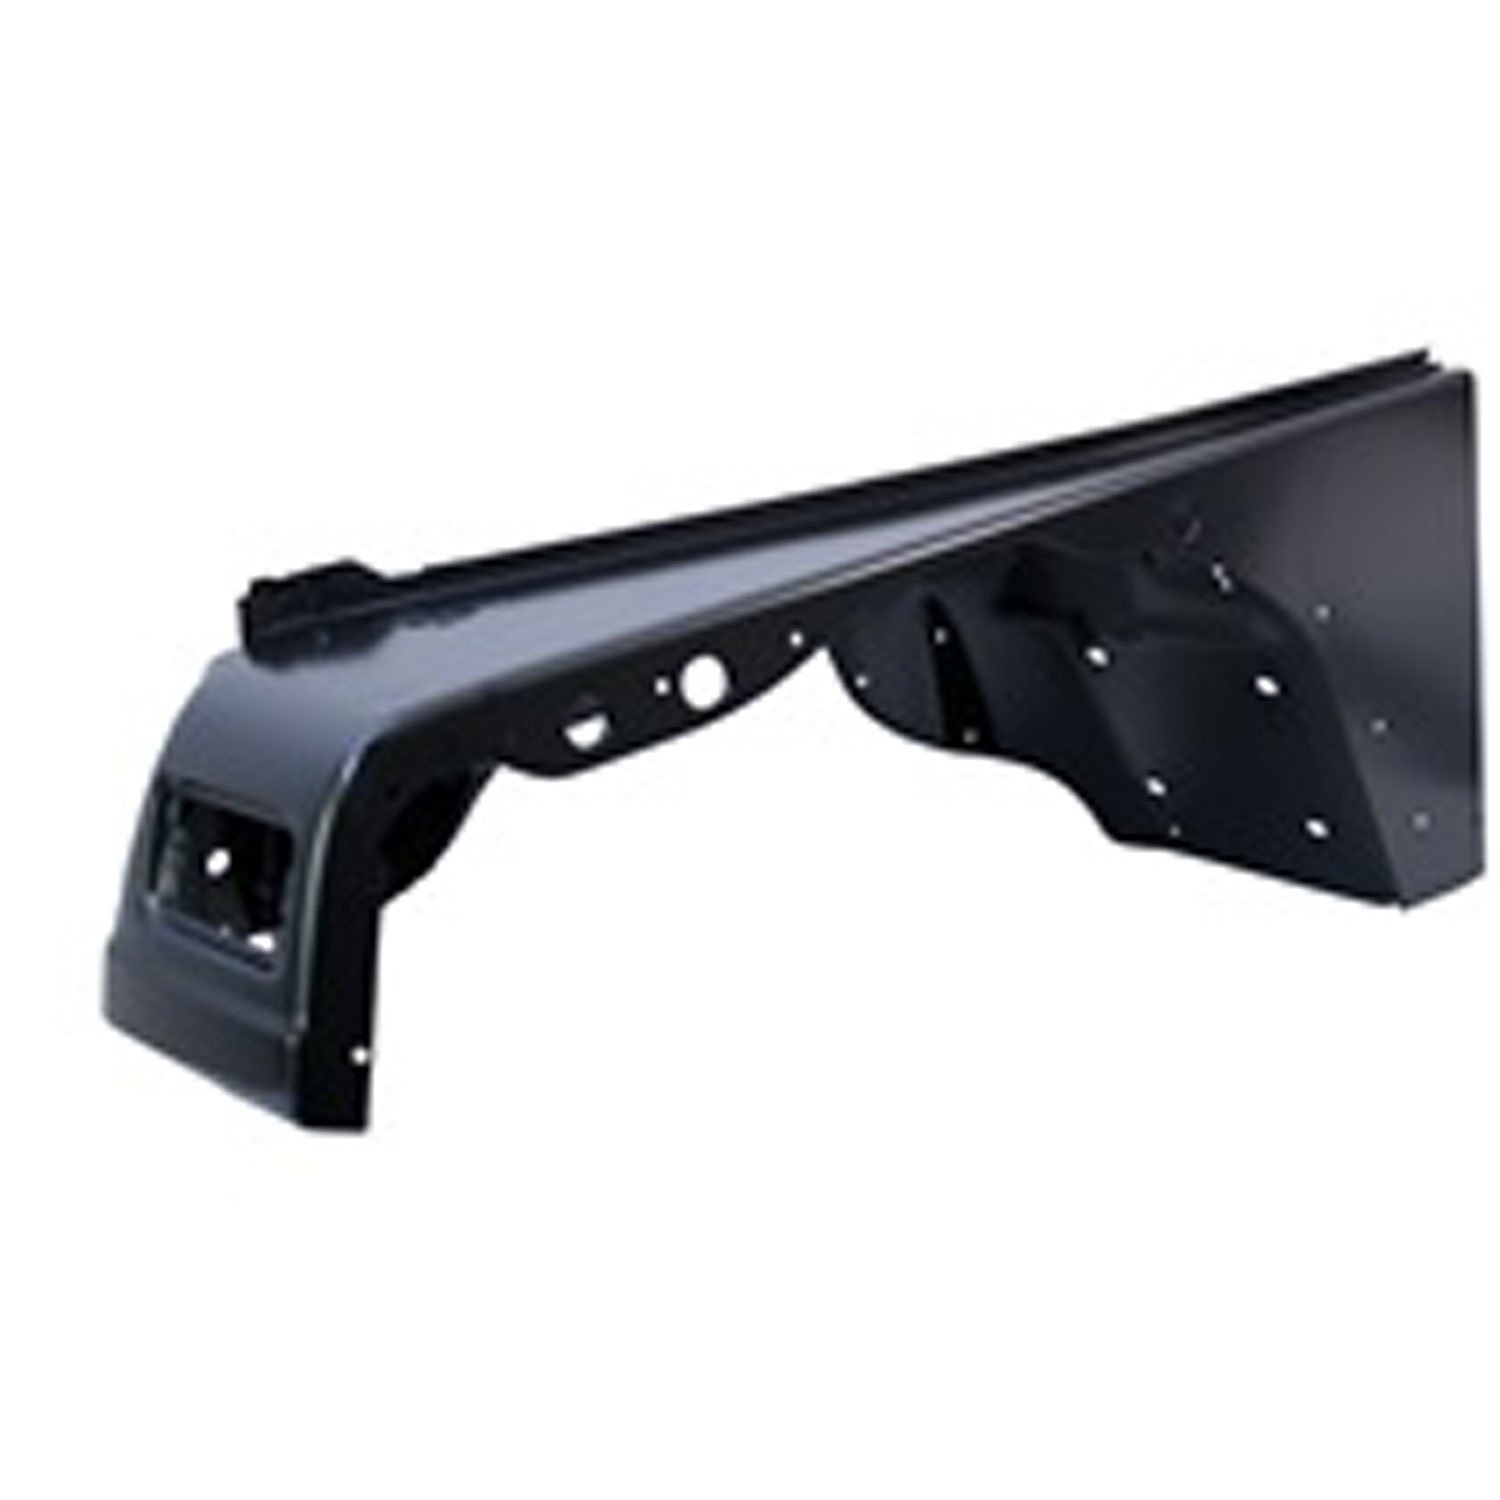 Replacement front fender from Omix-ADA, Fits left side of 97-06 Jeep Wrangler TJ and 04-06 LJ Wrangler Unlimited.